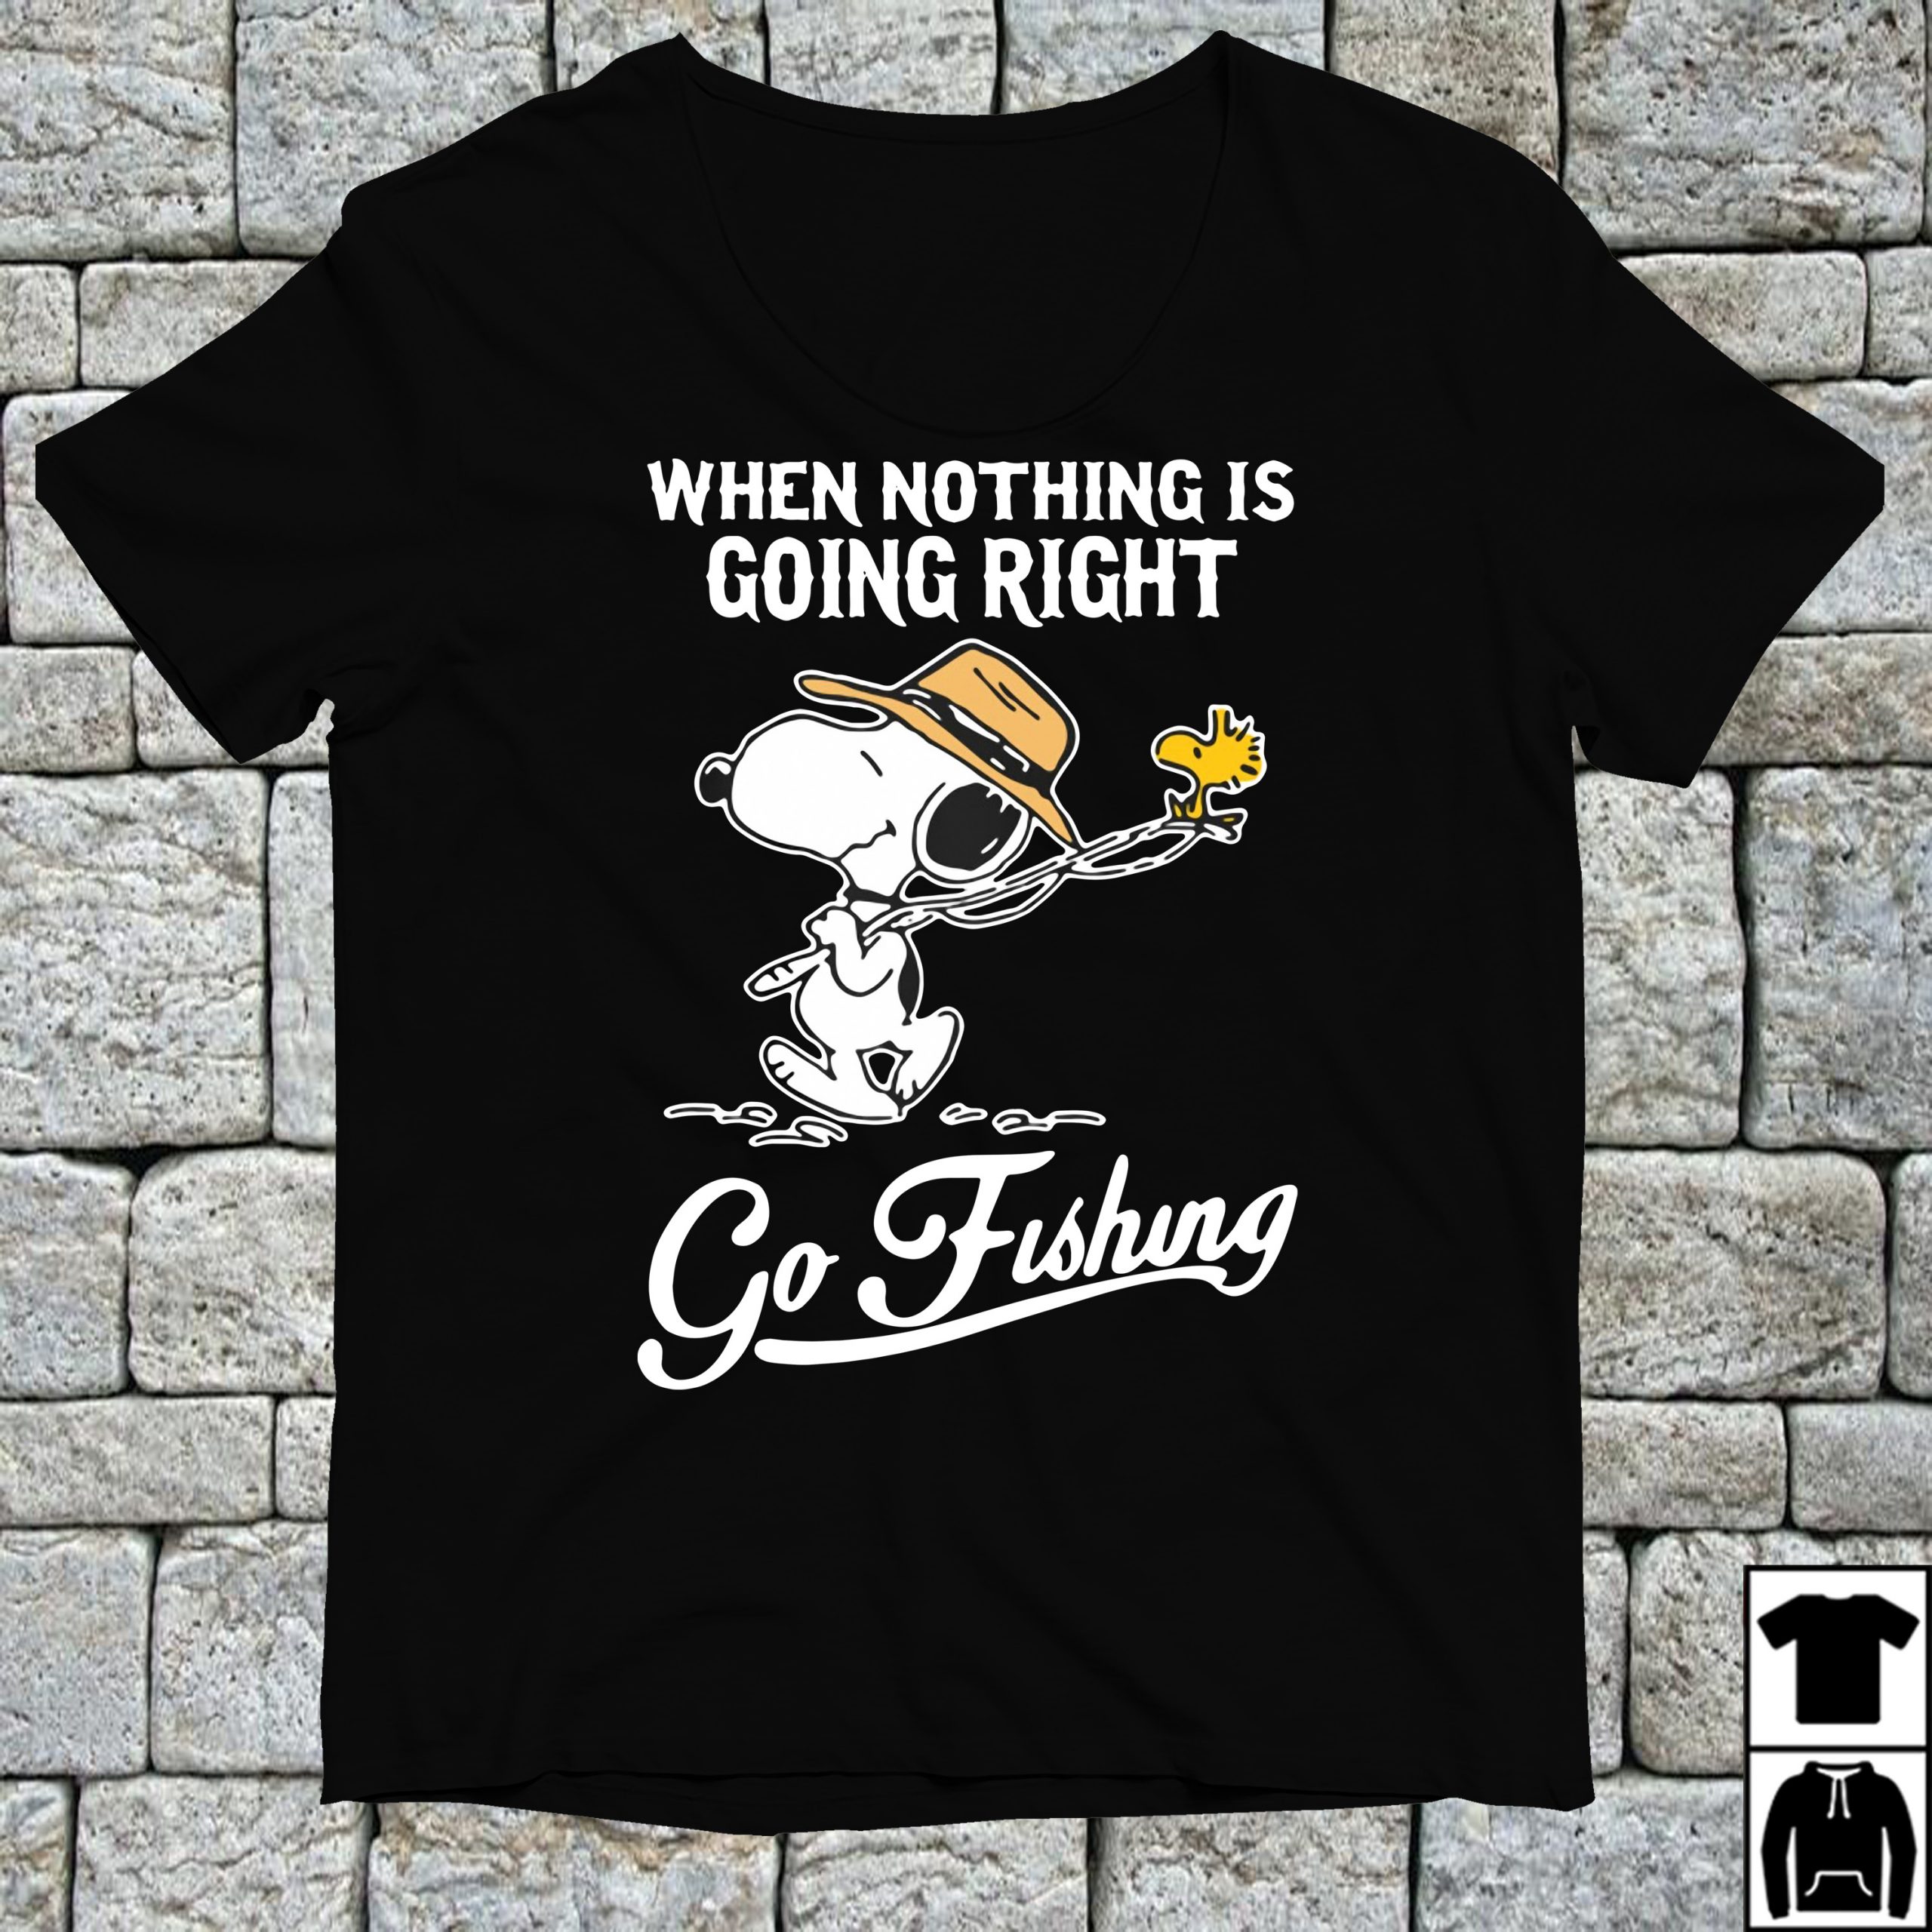 https://images.nemoshirt.com/wp-content/uploads/2019/01/snoopy-nothing-going-right-go-fishing-shirt-scaled.jpg